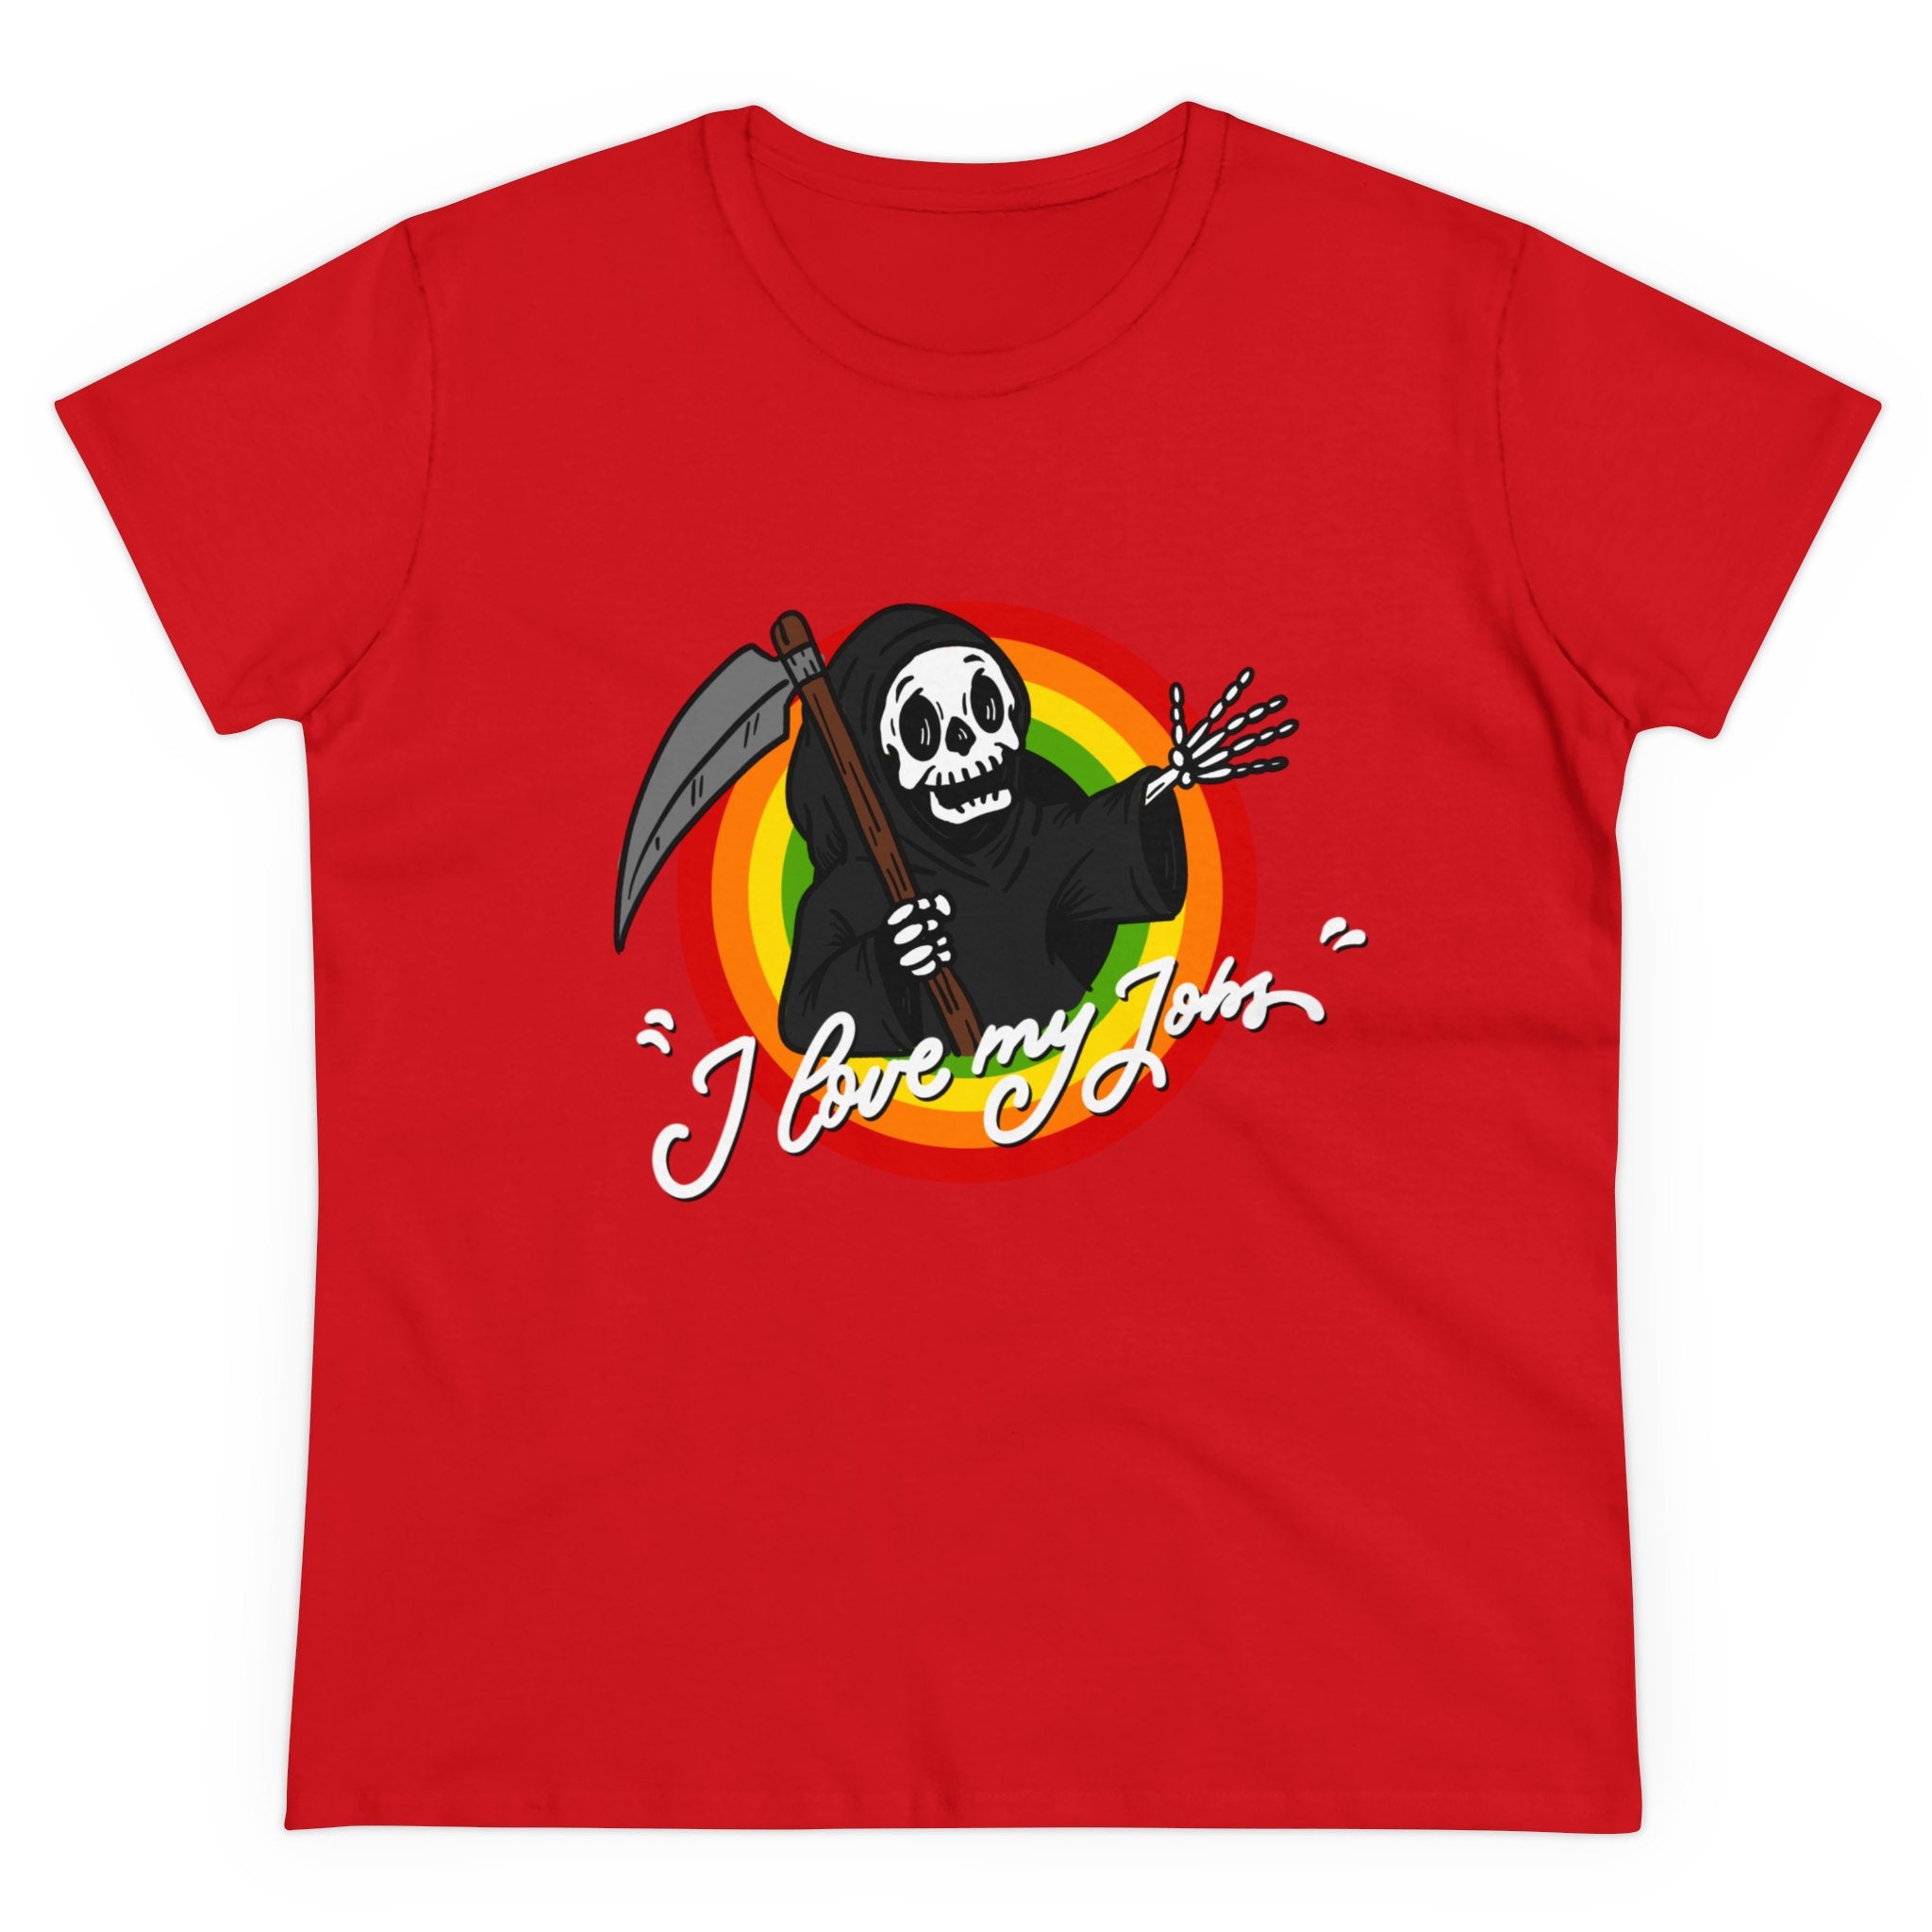 Red T-shirt crafted from soft, comfortable cotton featuring a cartoon skeleton dressed as the Grim Reaper holding a scythe, with the text "I love my job" in white script. Perfect for those who embrace their passion, this Love My Jobs - Women's Tee is both stylish and cozy.